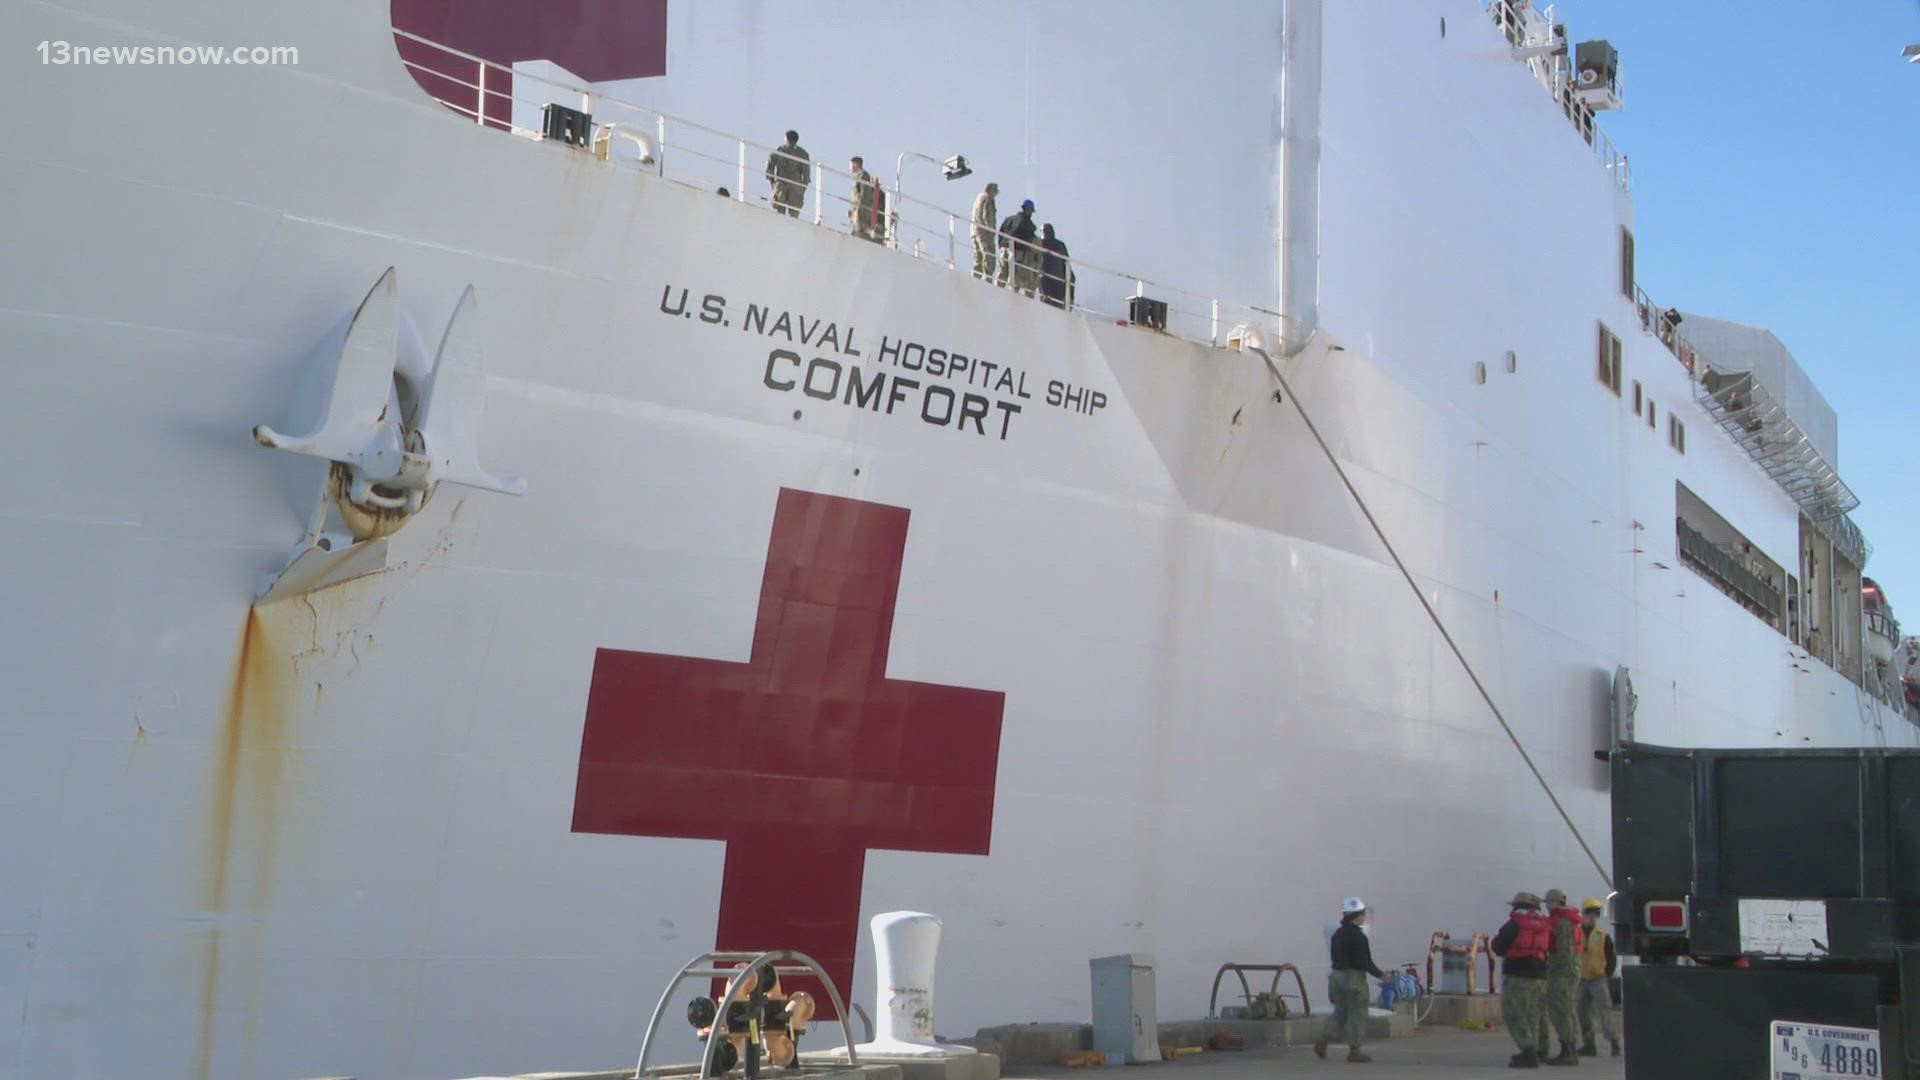 USNS Comfort docked at Naval Station Norfolk Wednesday, after a two-month deployment.